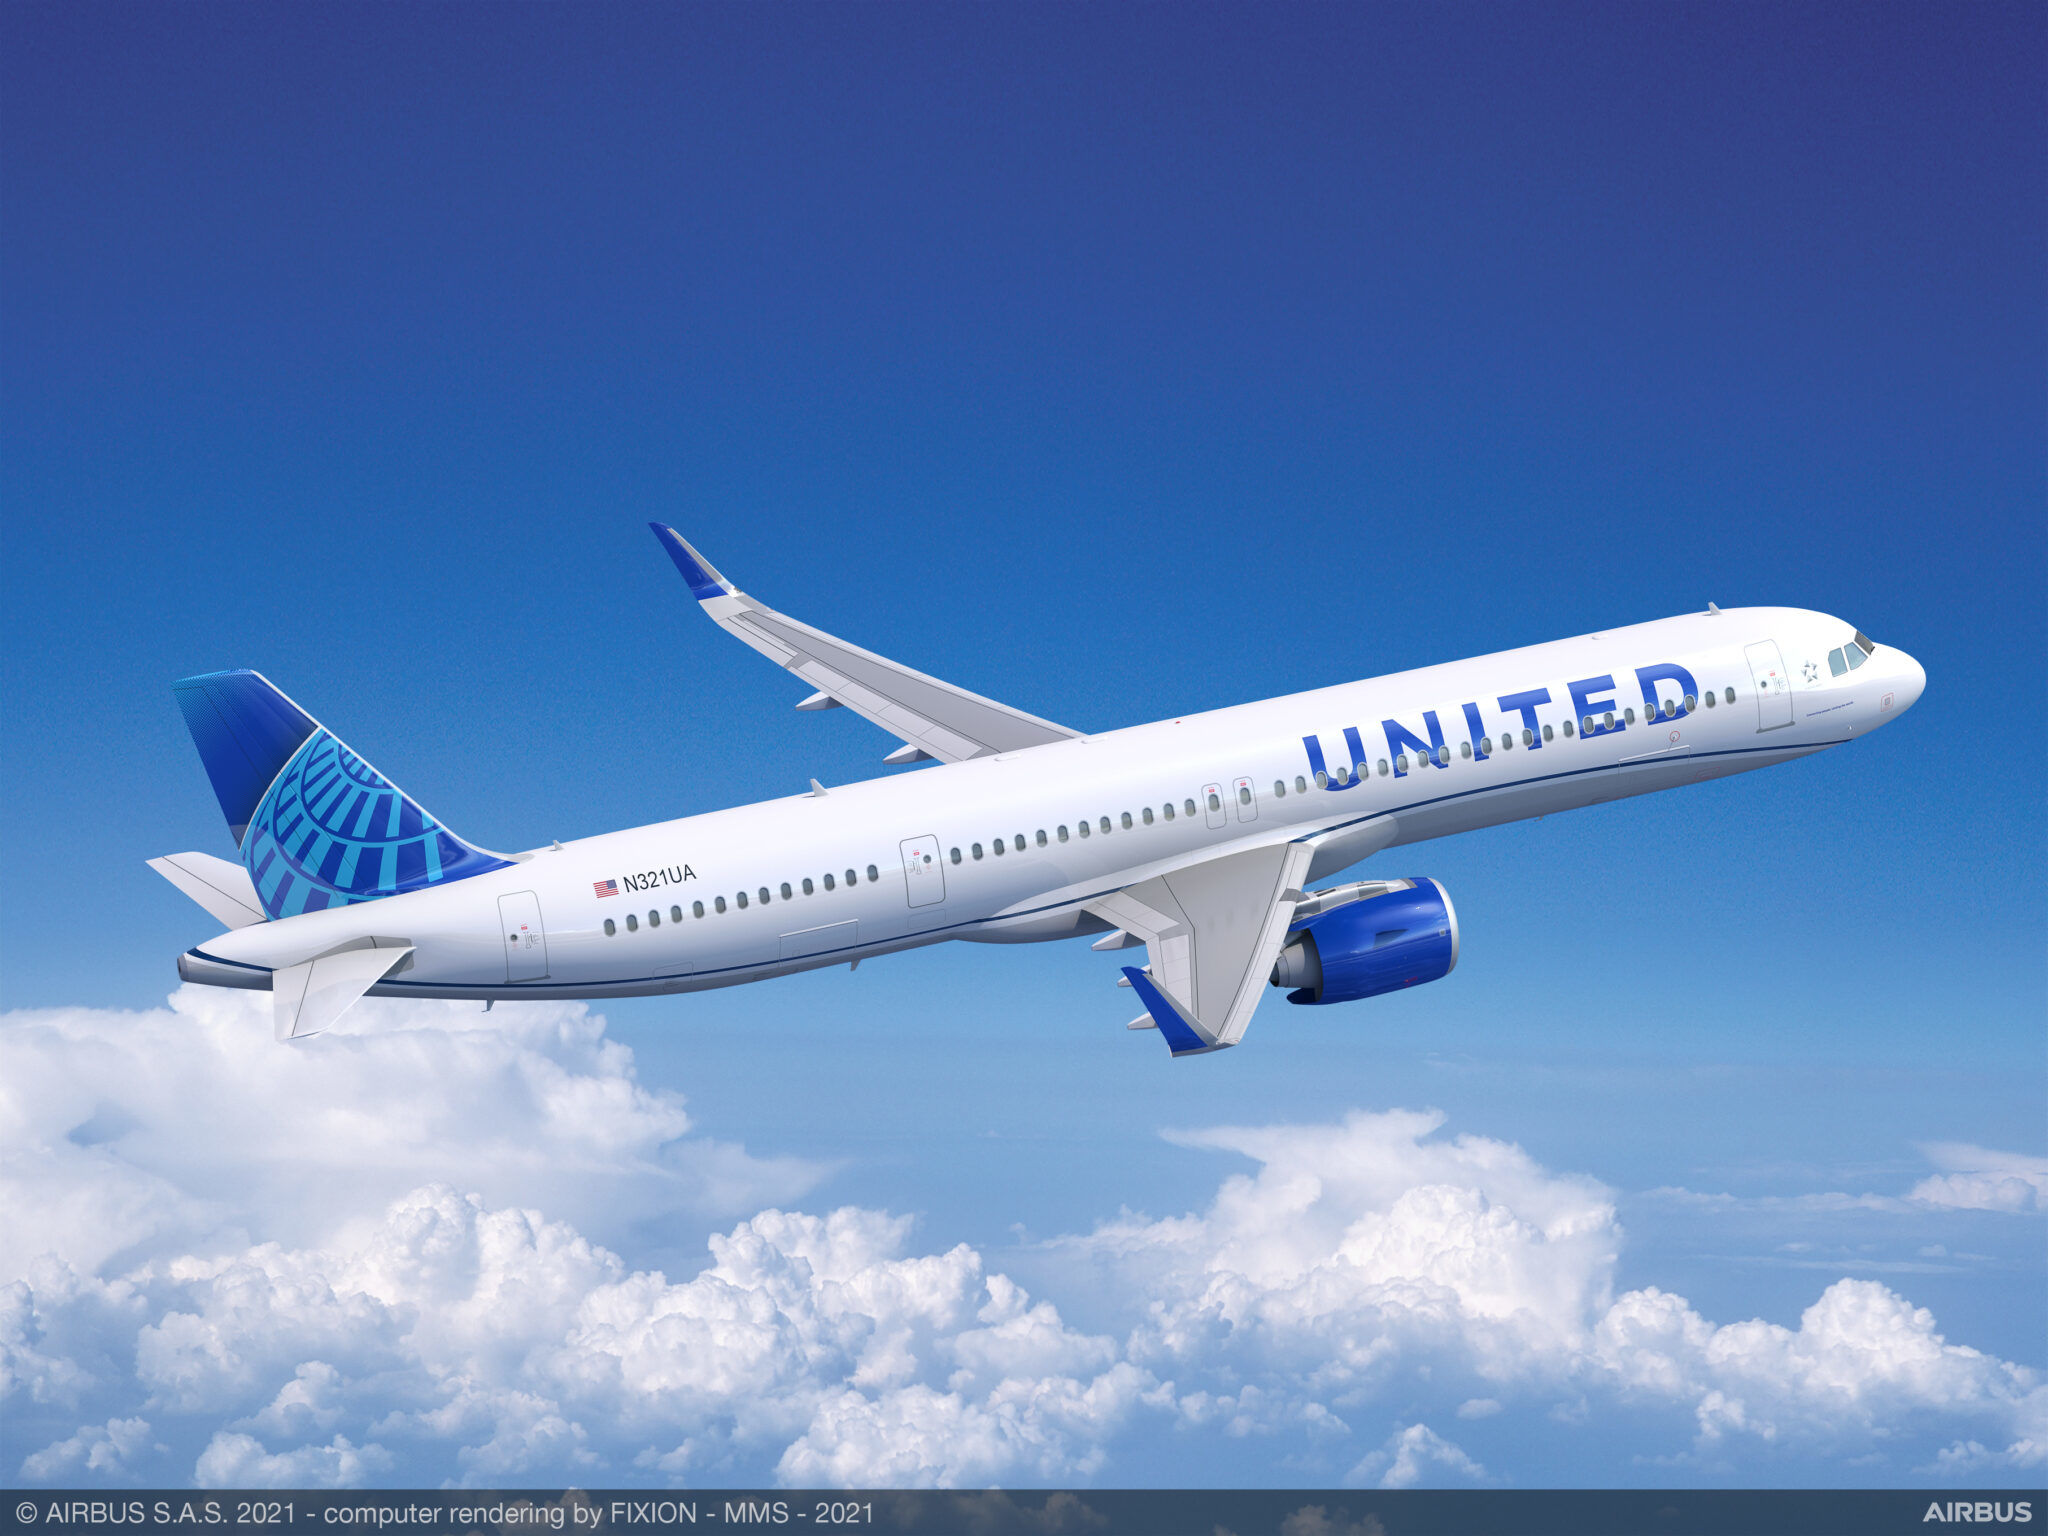 United Airlines signs for 35 leased Airbus A321neos in place of repeatedly delayed Boeing 737 Max 10s